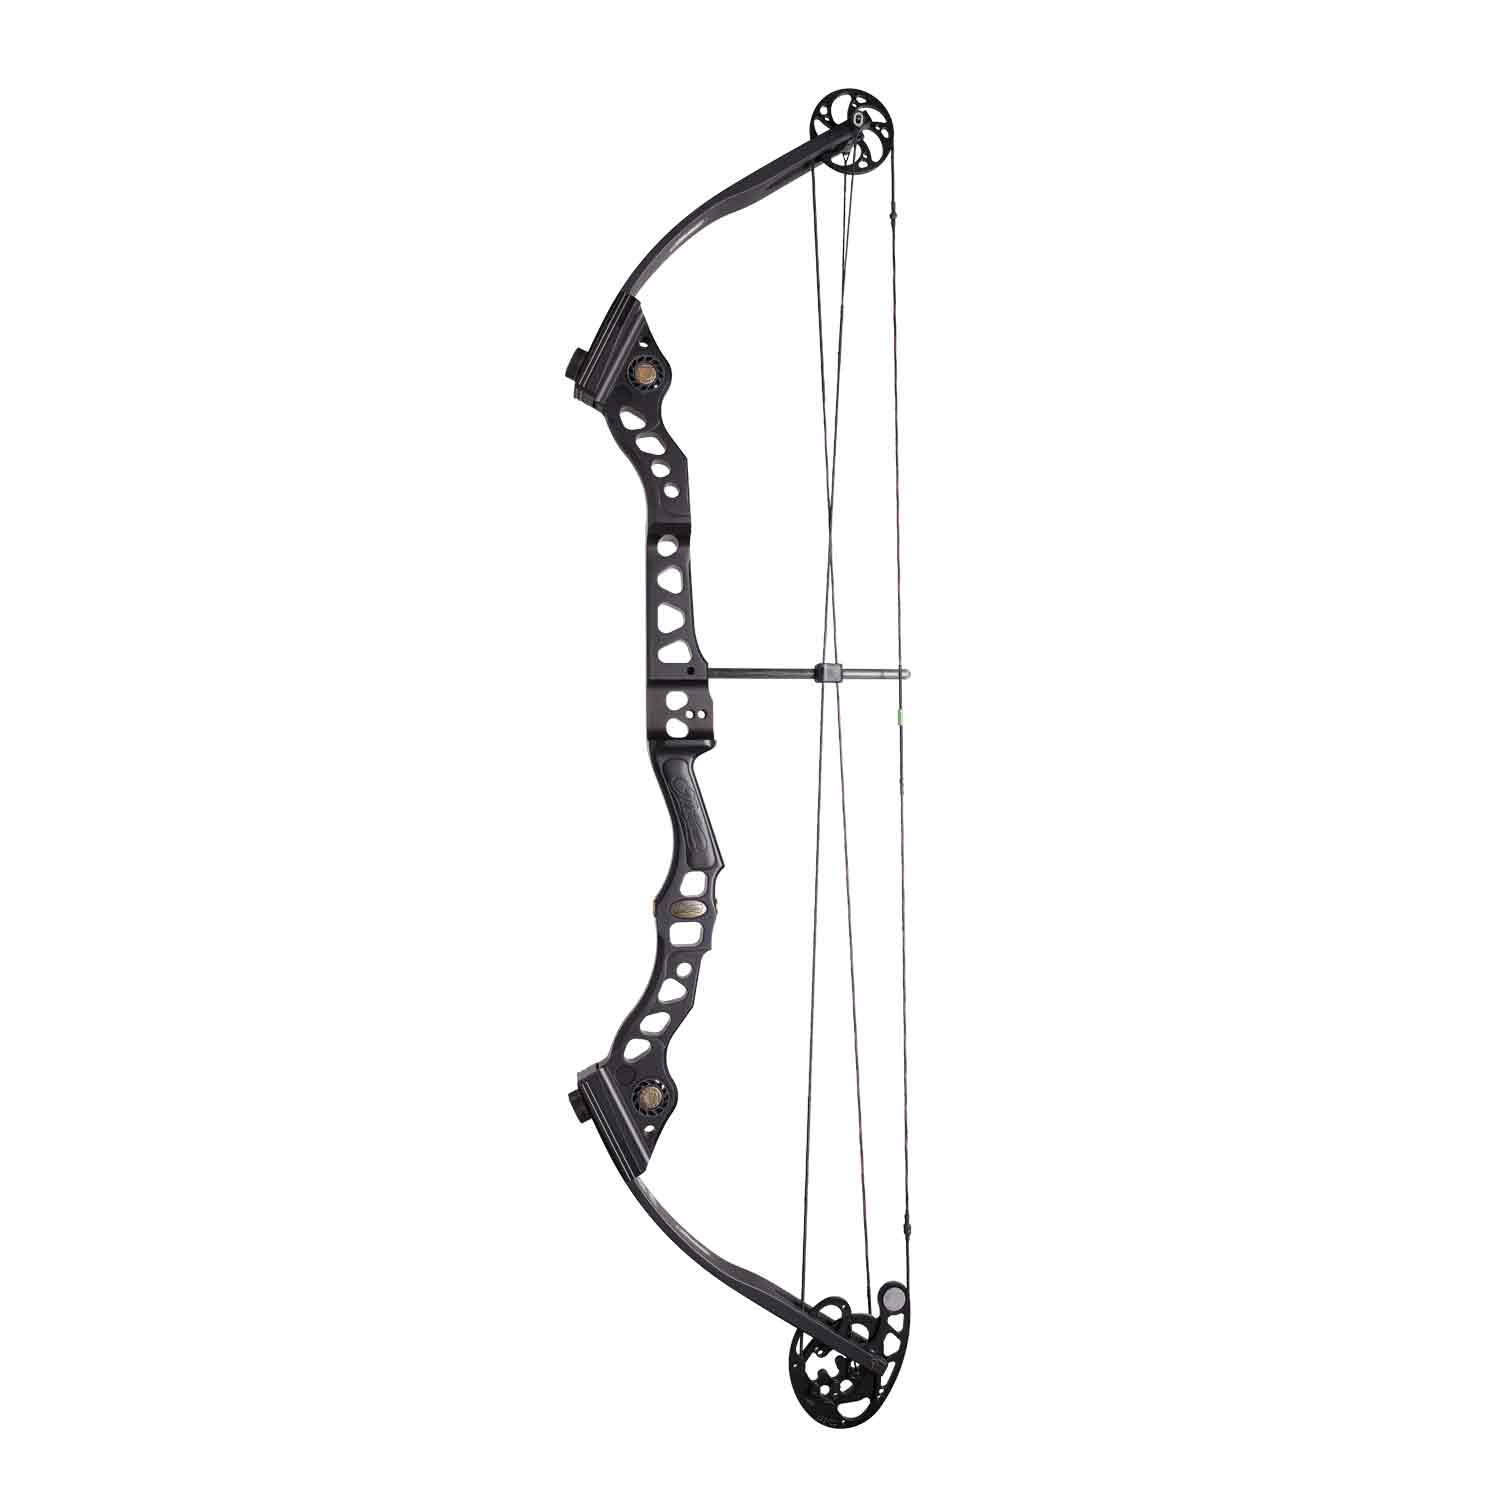 2020 Mathews Conquest 4 Compound Bow (Max Cam)  (Clearance X1037006)